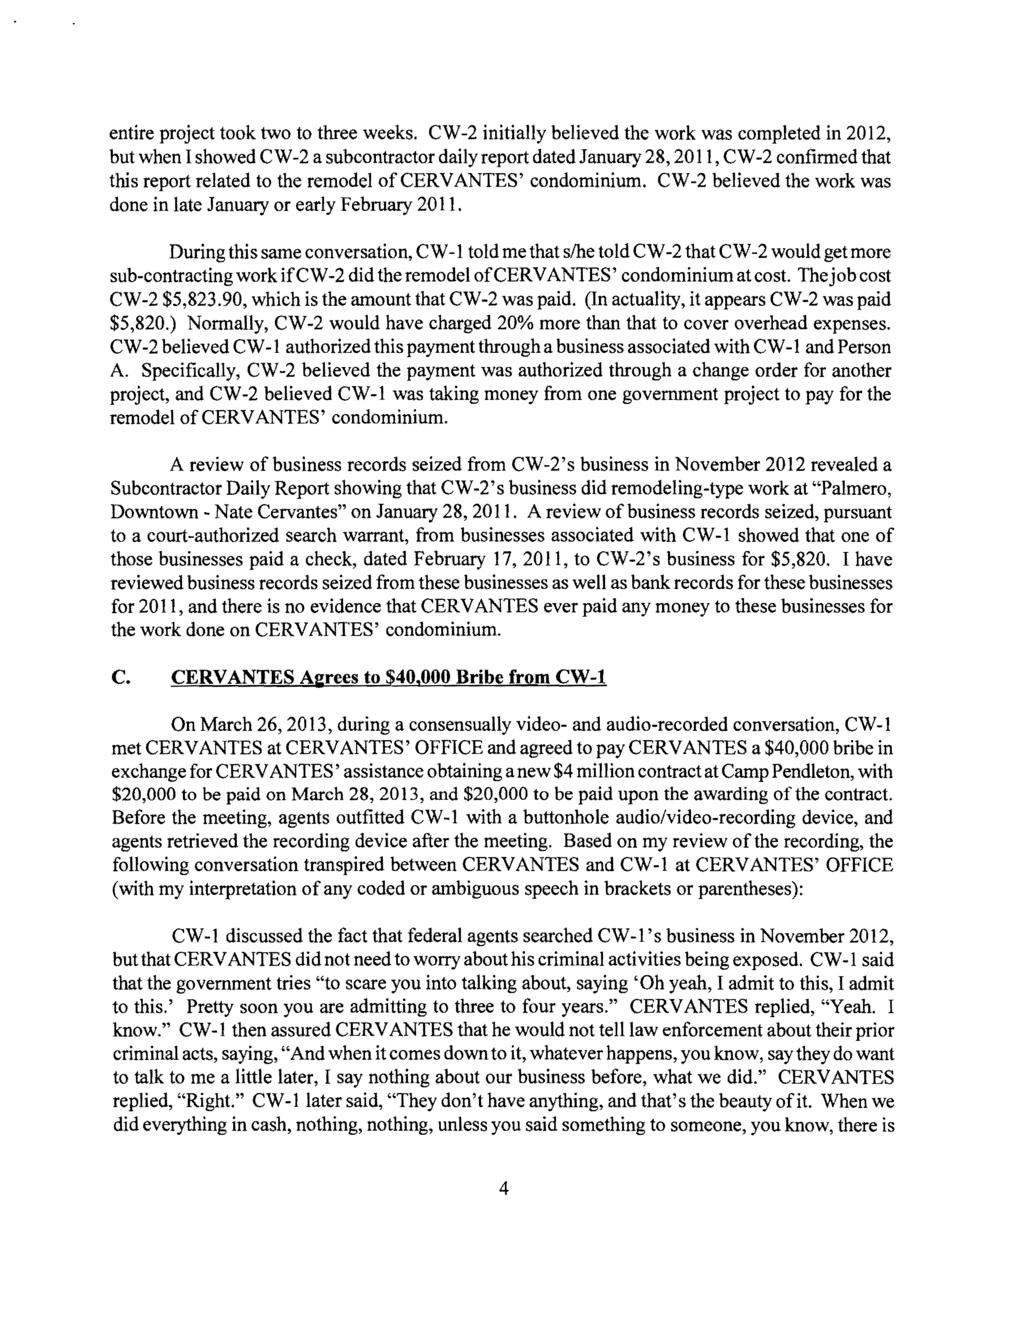 Case 3:13-cr-01345-AJB Document 1 Filed 03/29/13 Page 4 of 6 entire project took two to three weeks.